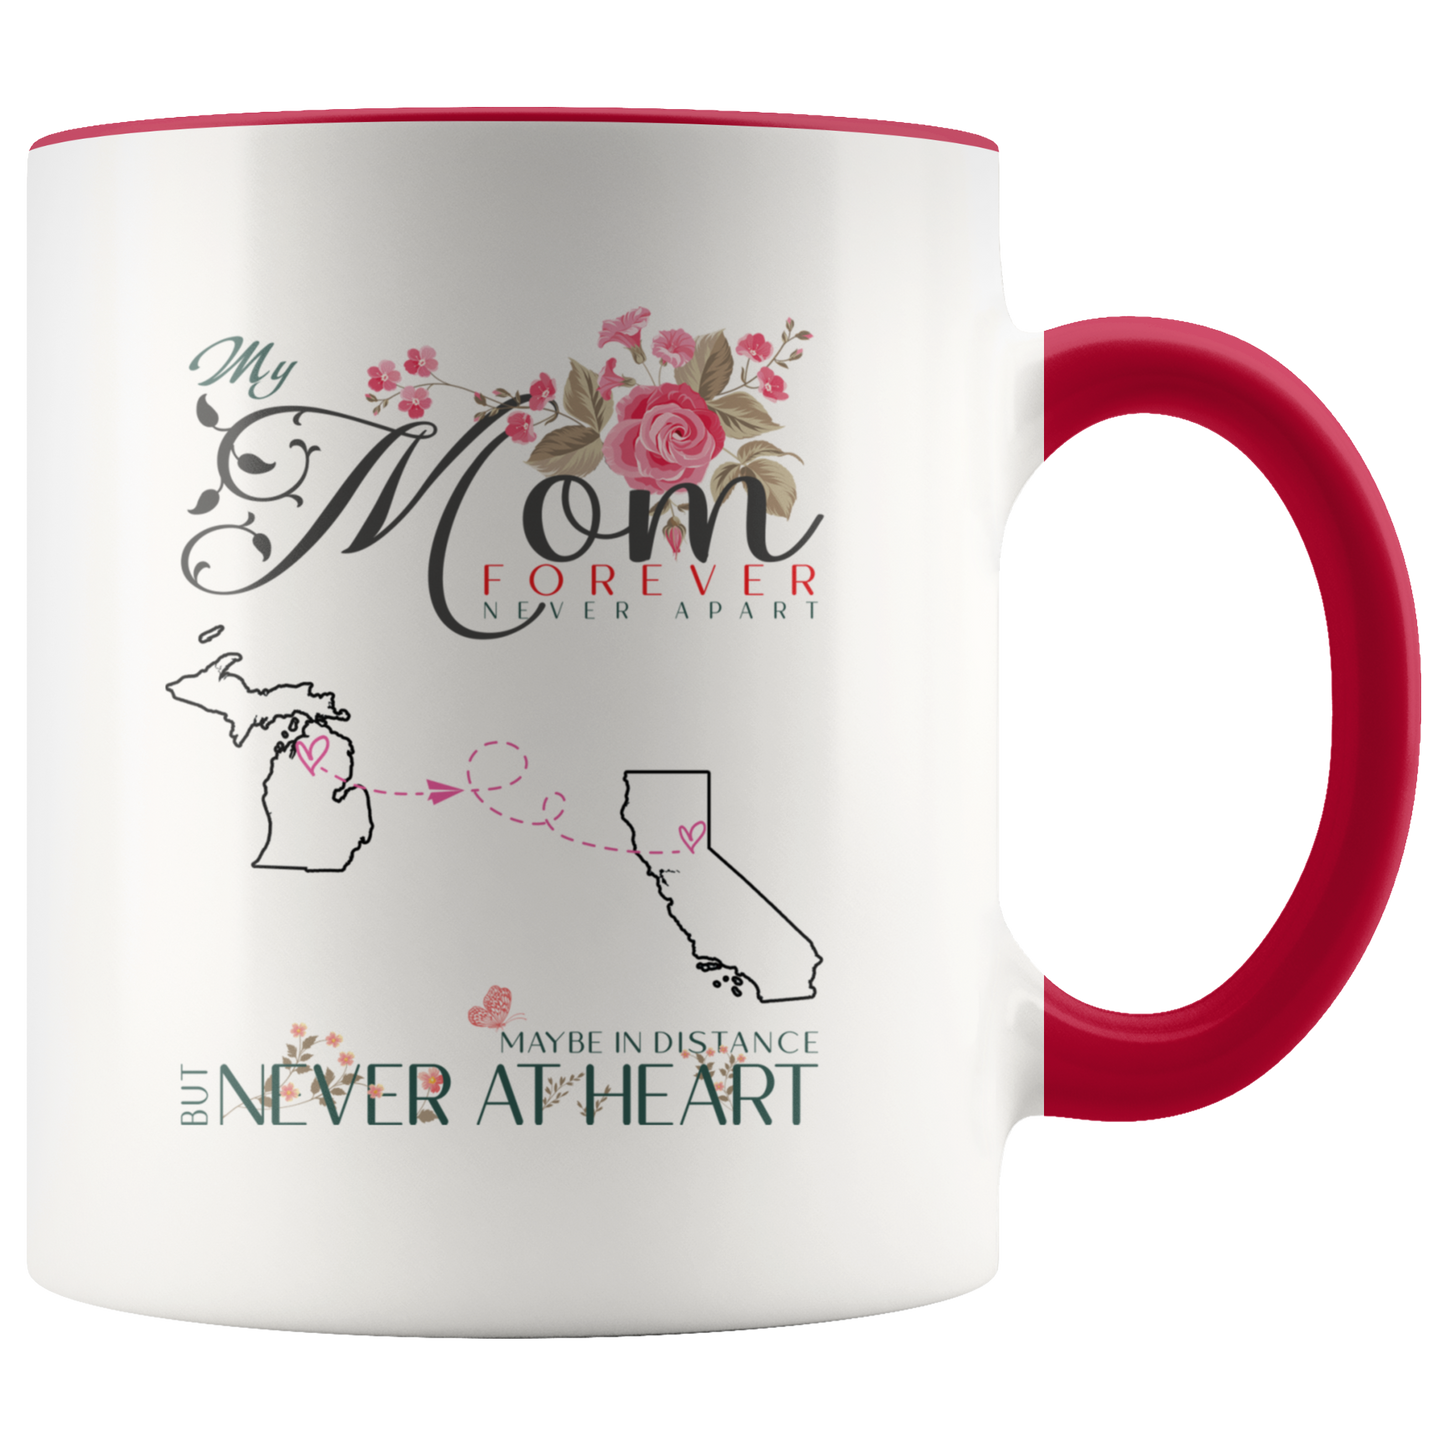 M-20321571-sp-26807 - [ Michigan | California ] (CC_Accent_Mug_) Personalized Mothers Day Coffee Mug - My Mom Forever Never A